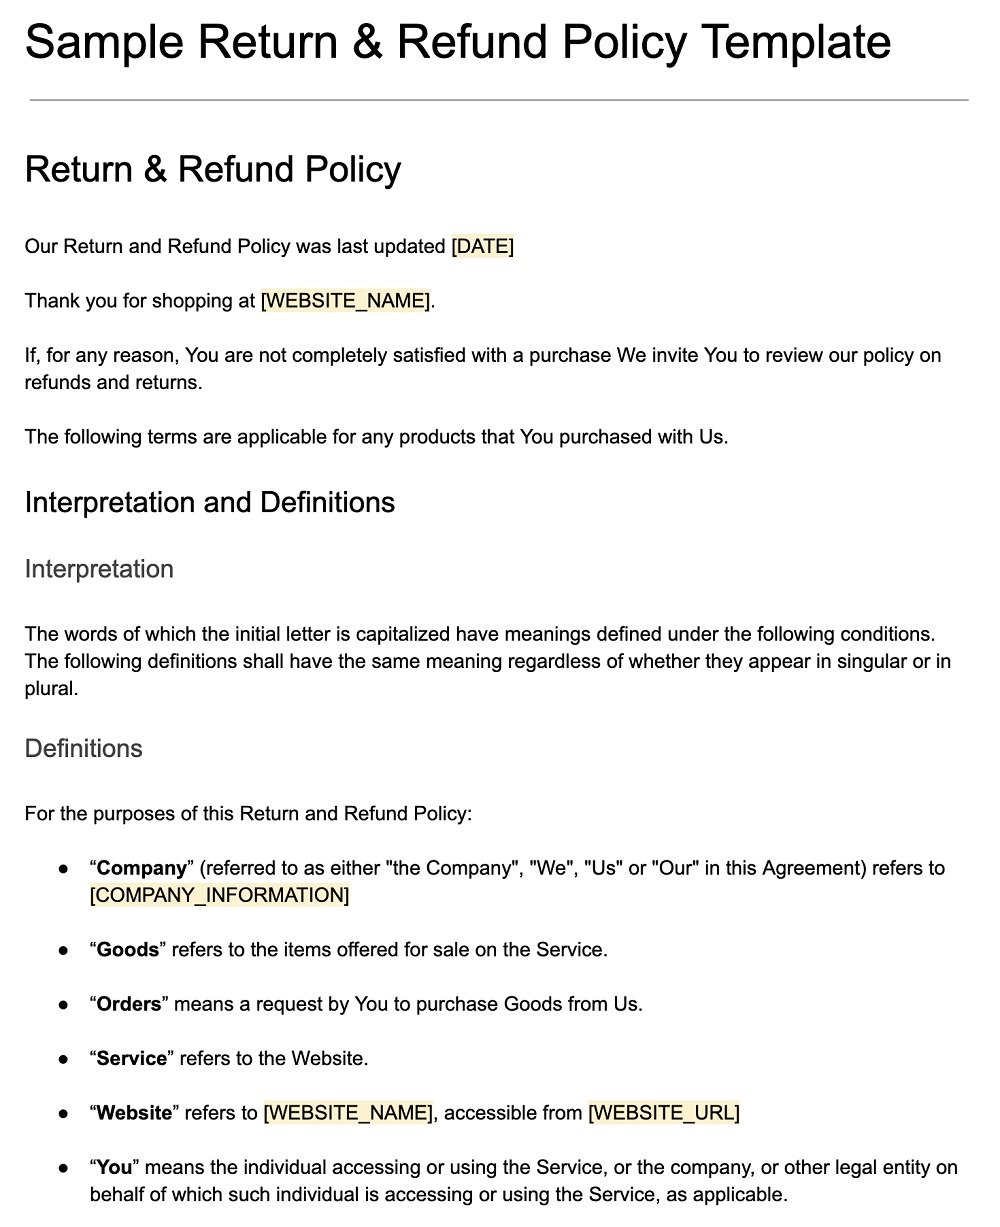 Screenshot of the Sample Return and Refund Policy Template